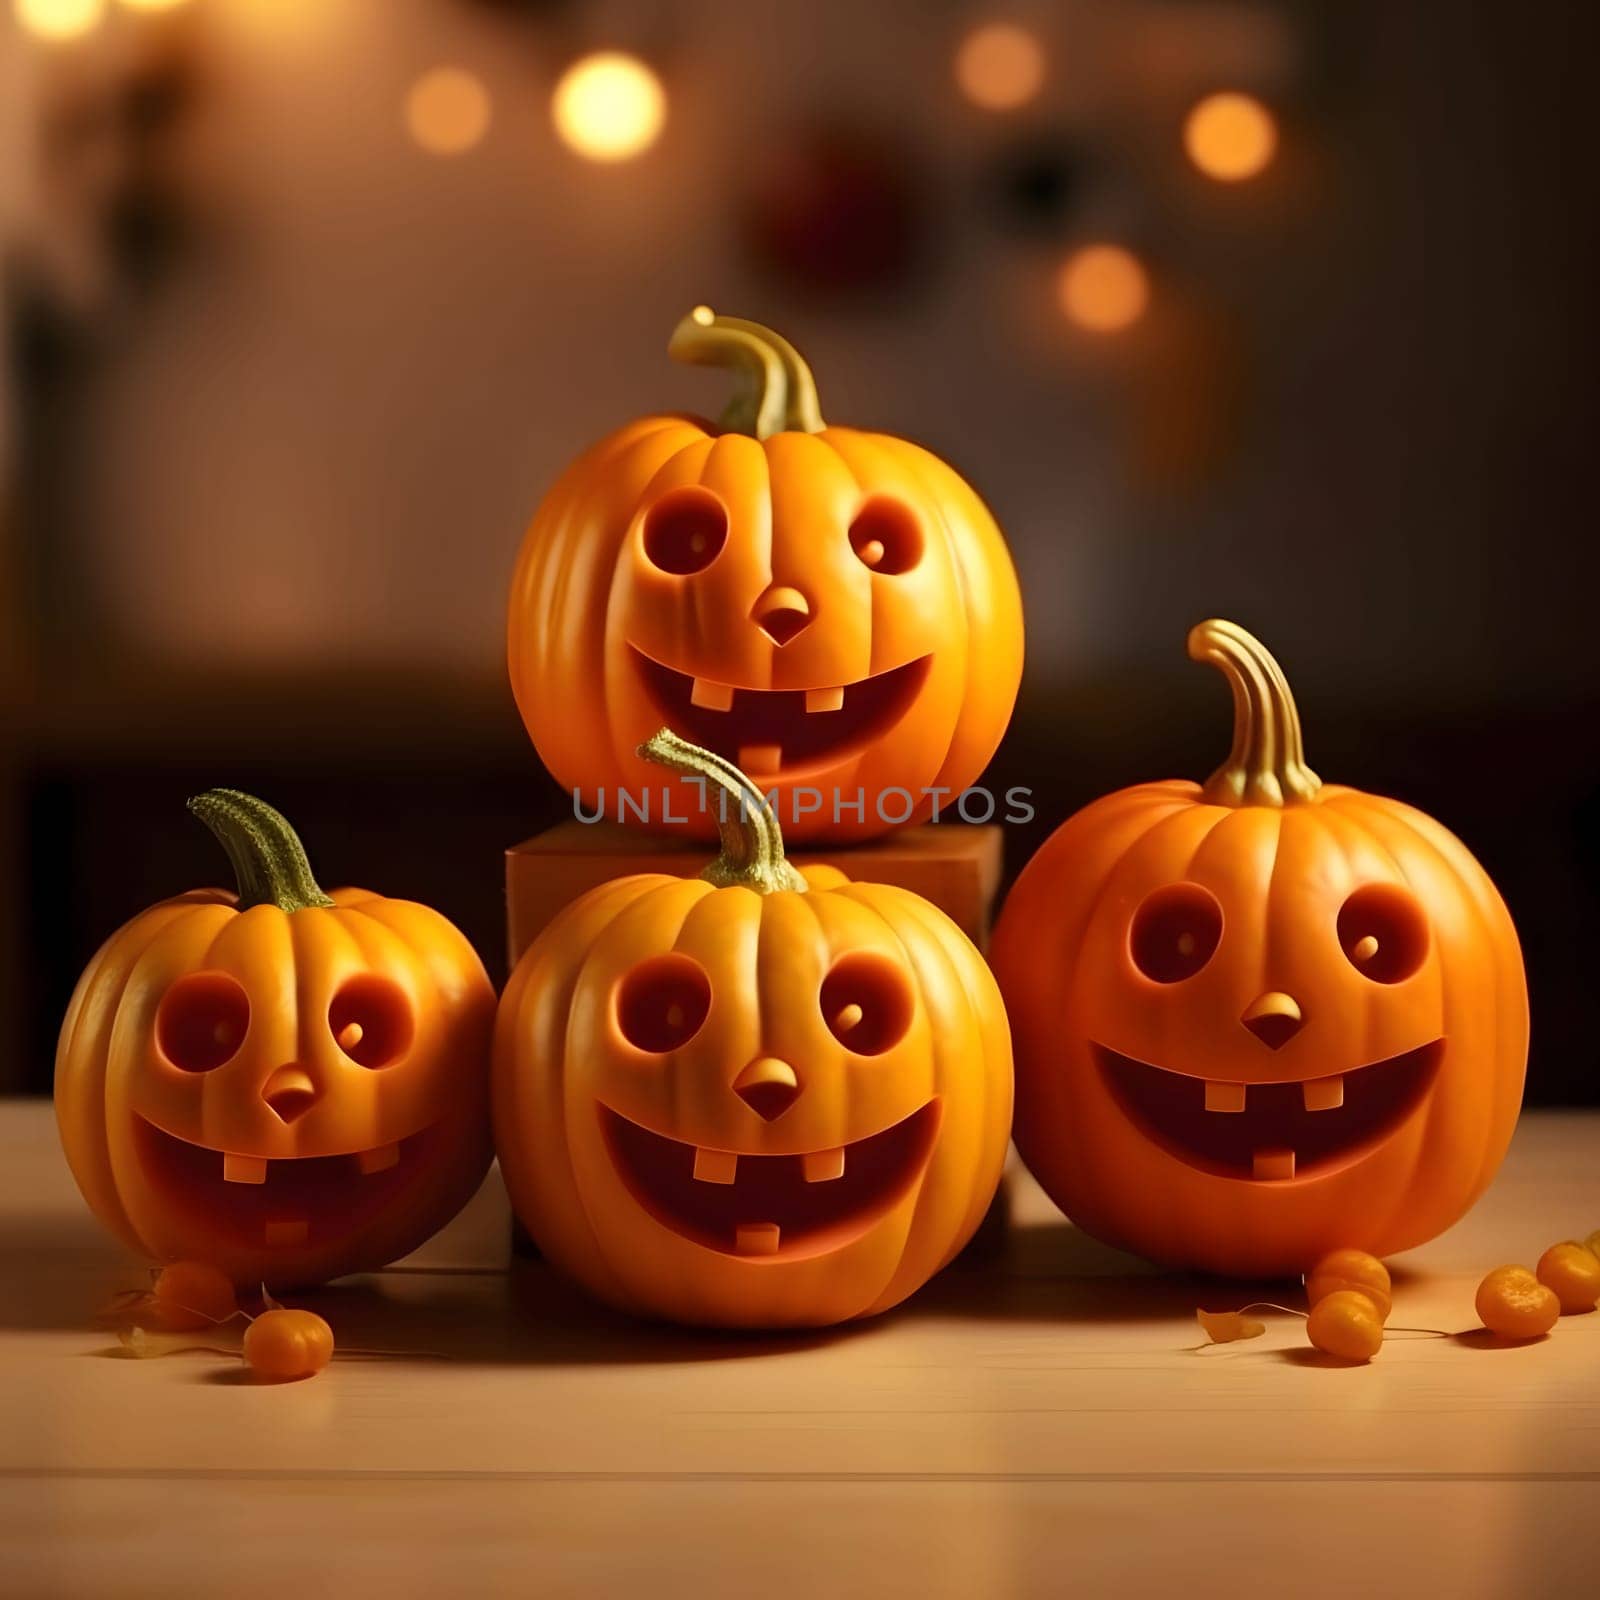 Four small, stacked side by side smiling gouged jack-o-lantern pumpkins on a smudged background, a Halloween image. by ThemesS